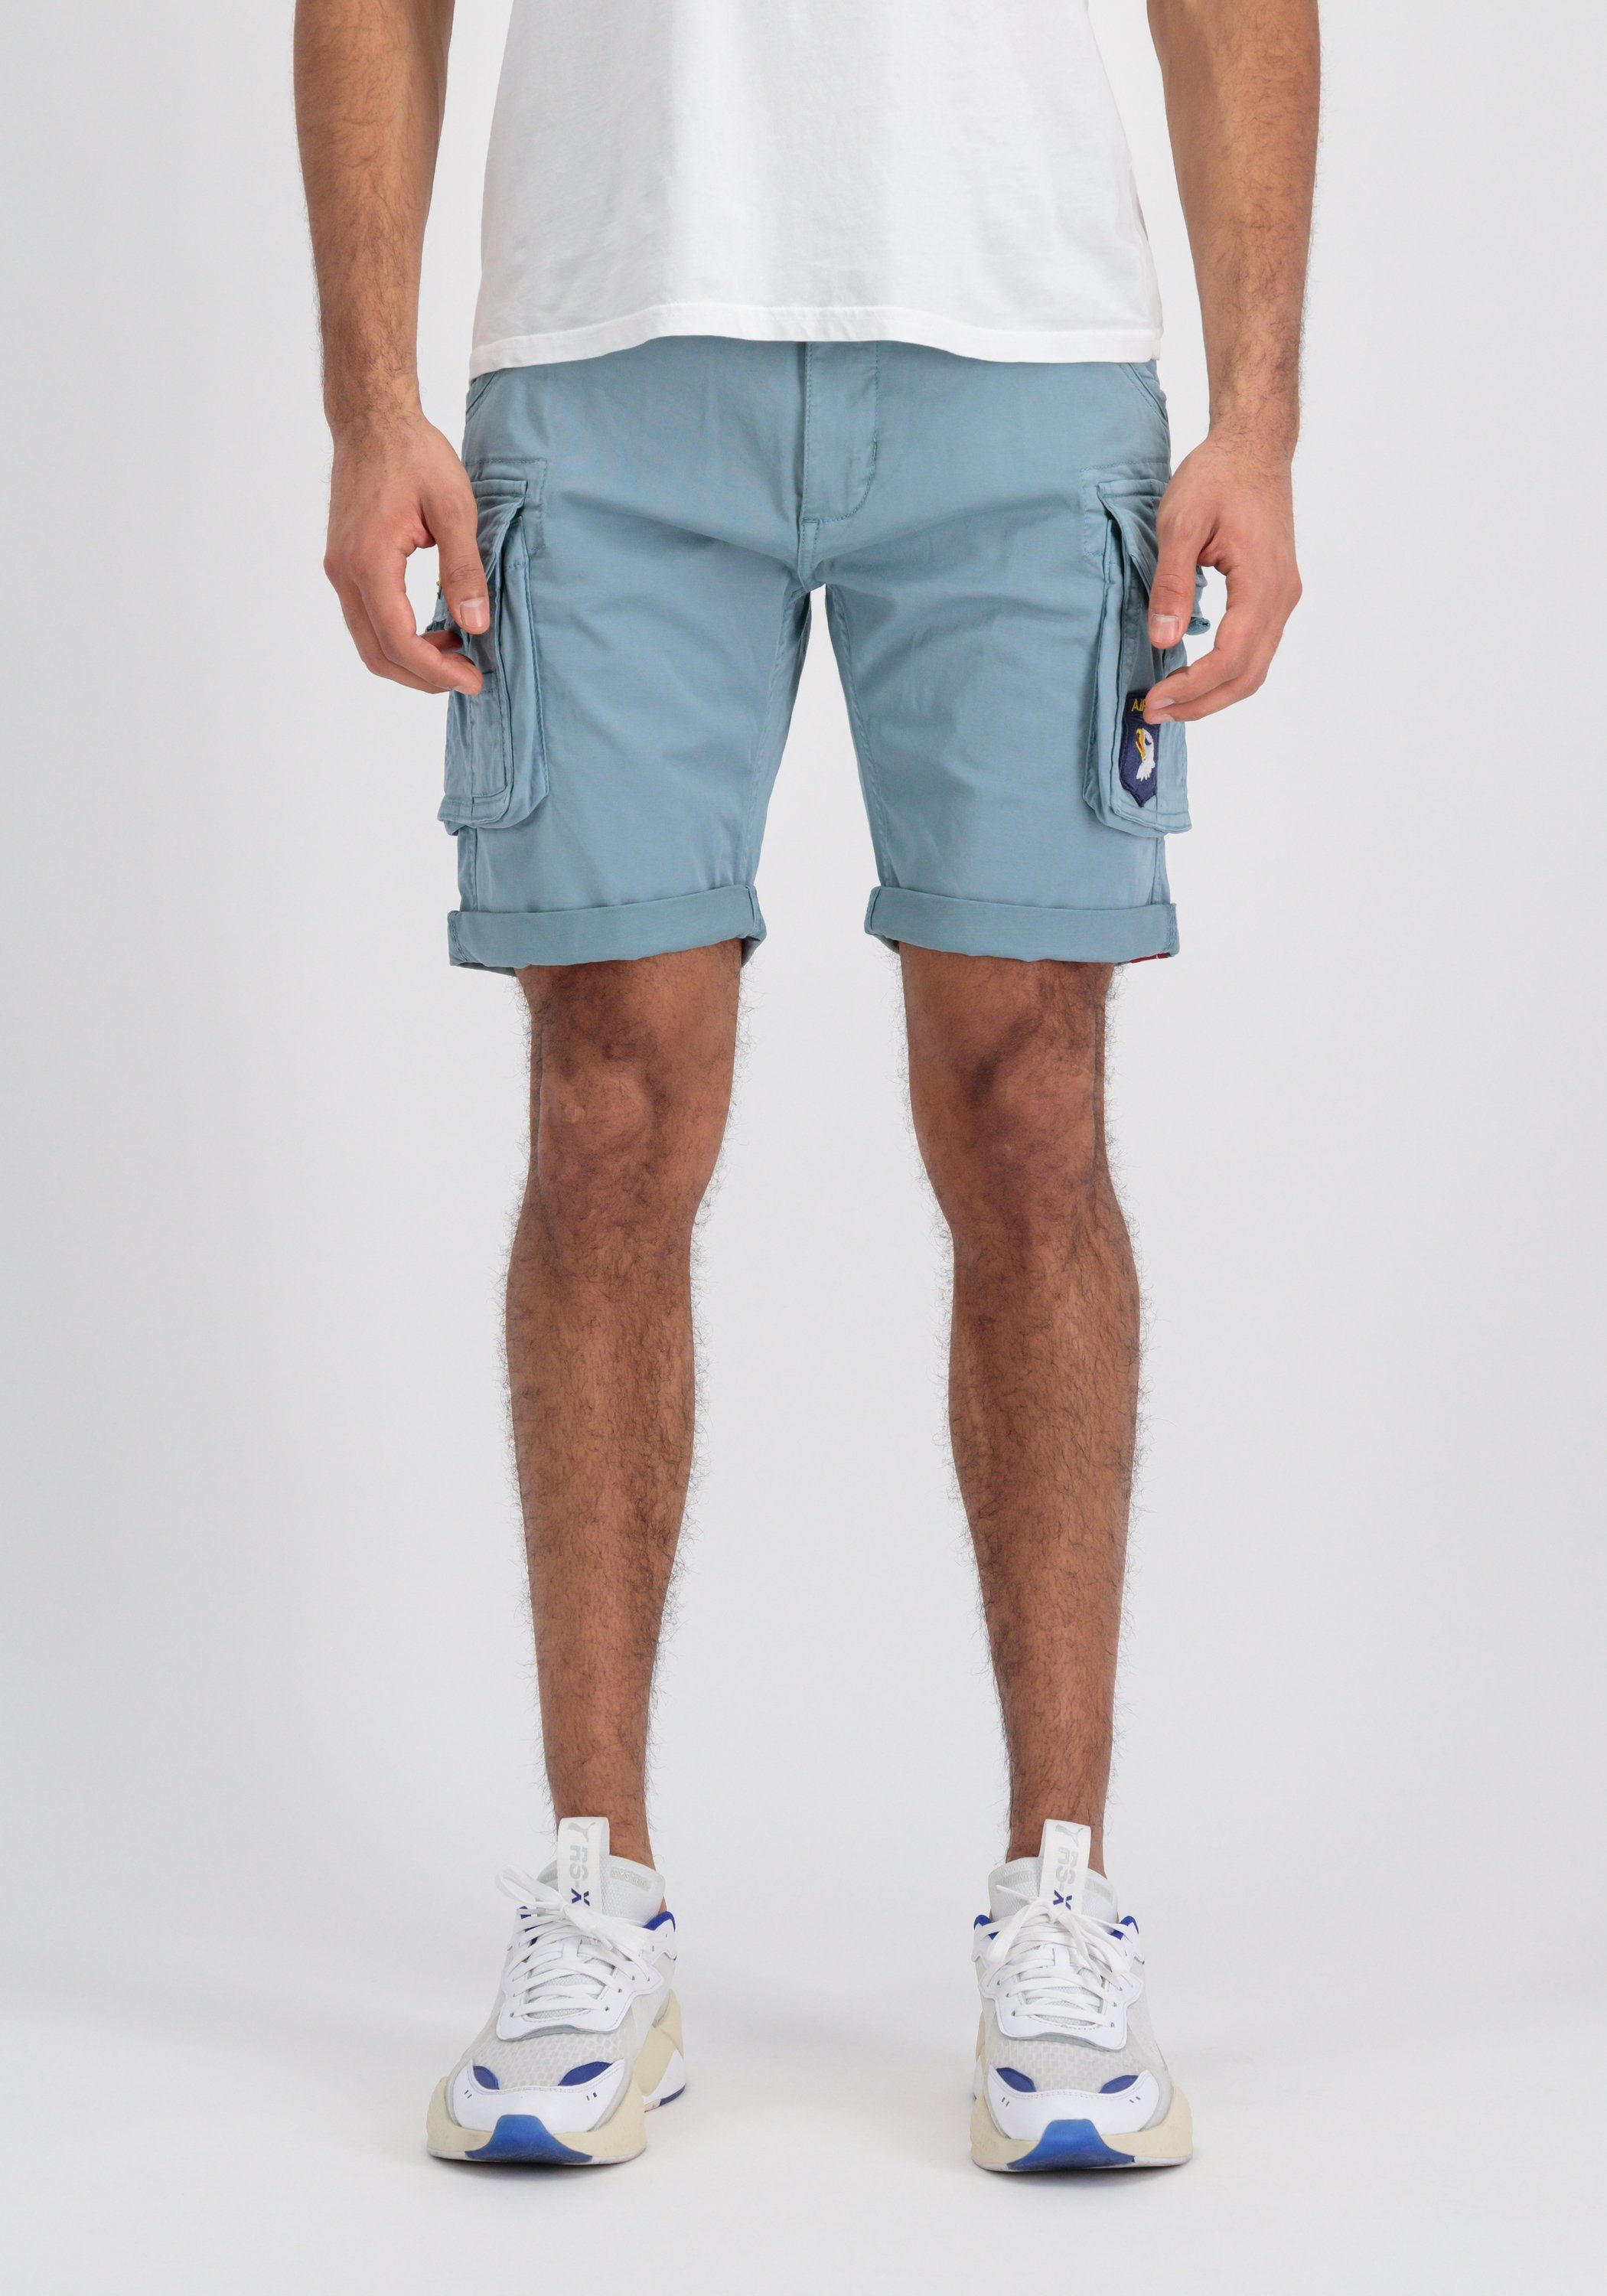 Alpha Patch Men Industries Crew greyblue Shorts Alpha Shorts - Industries Short